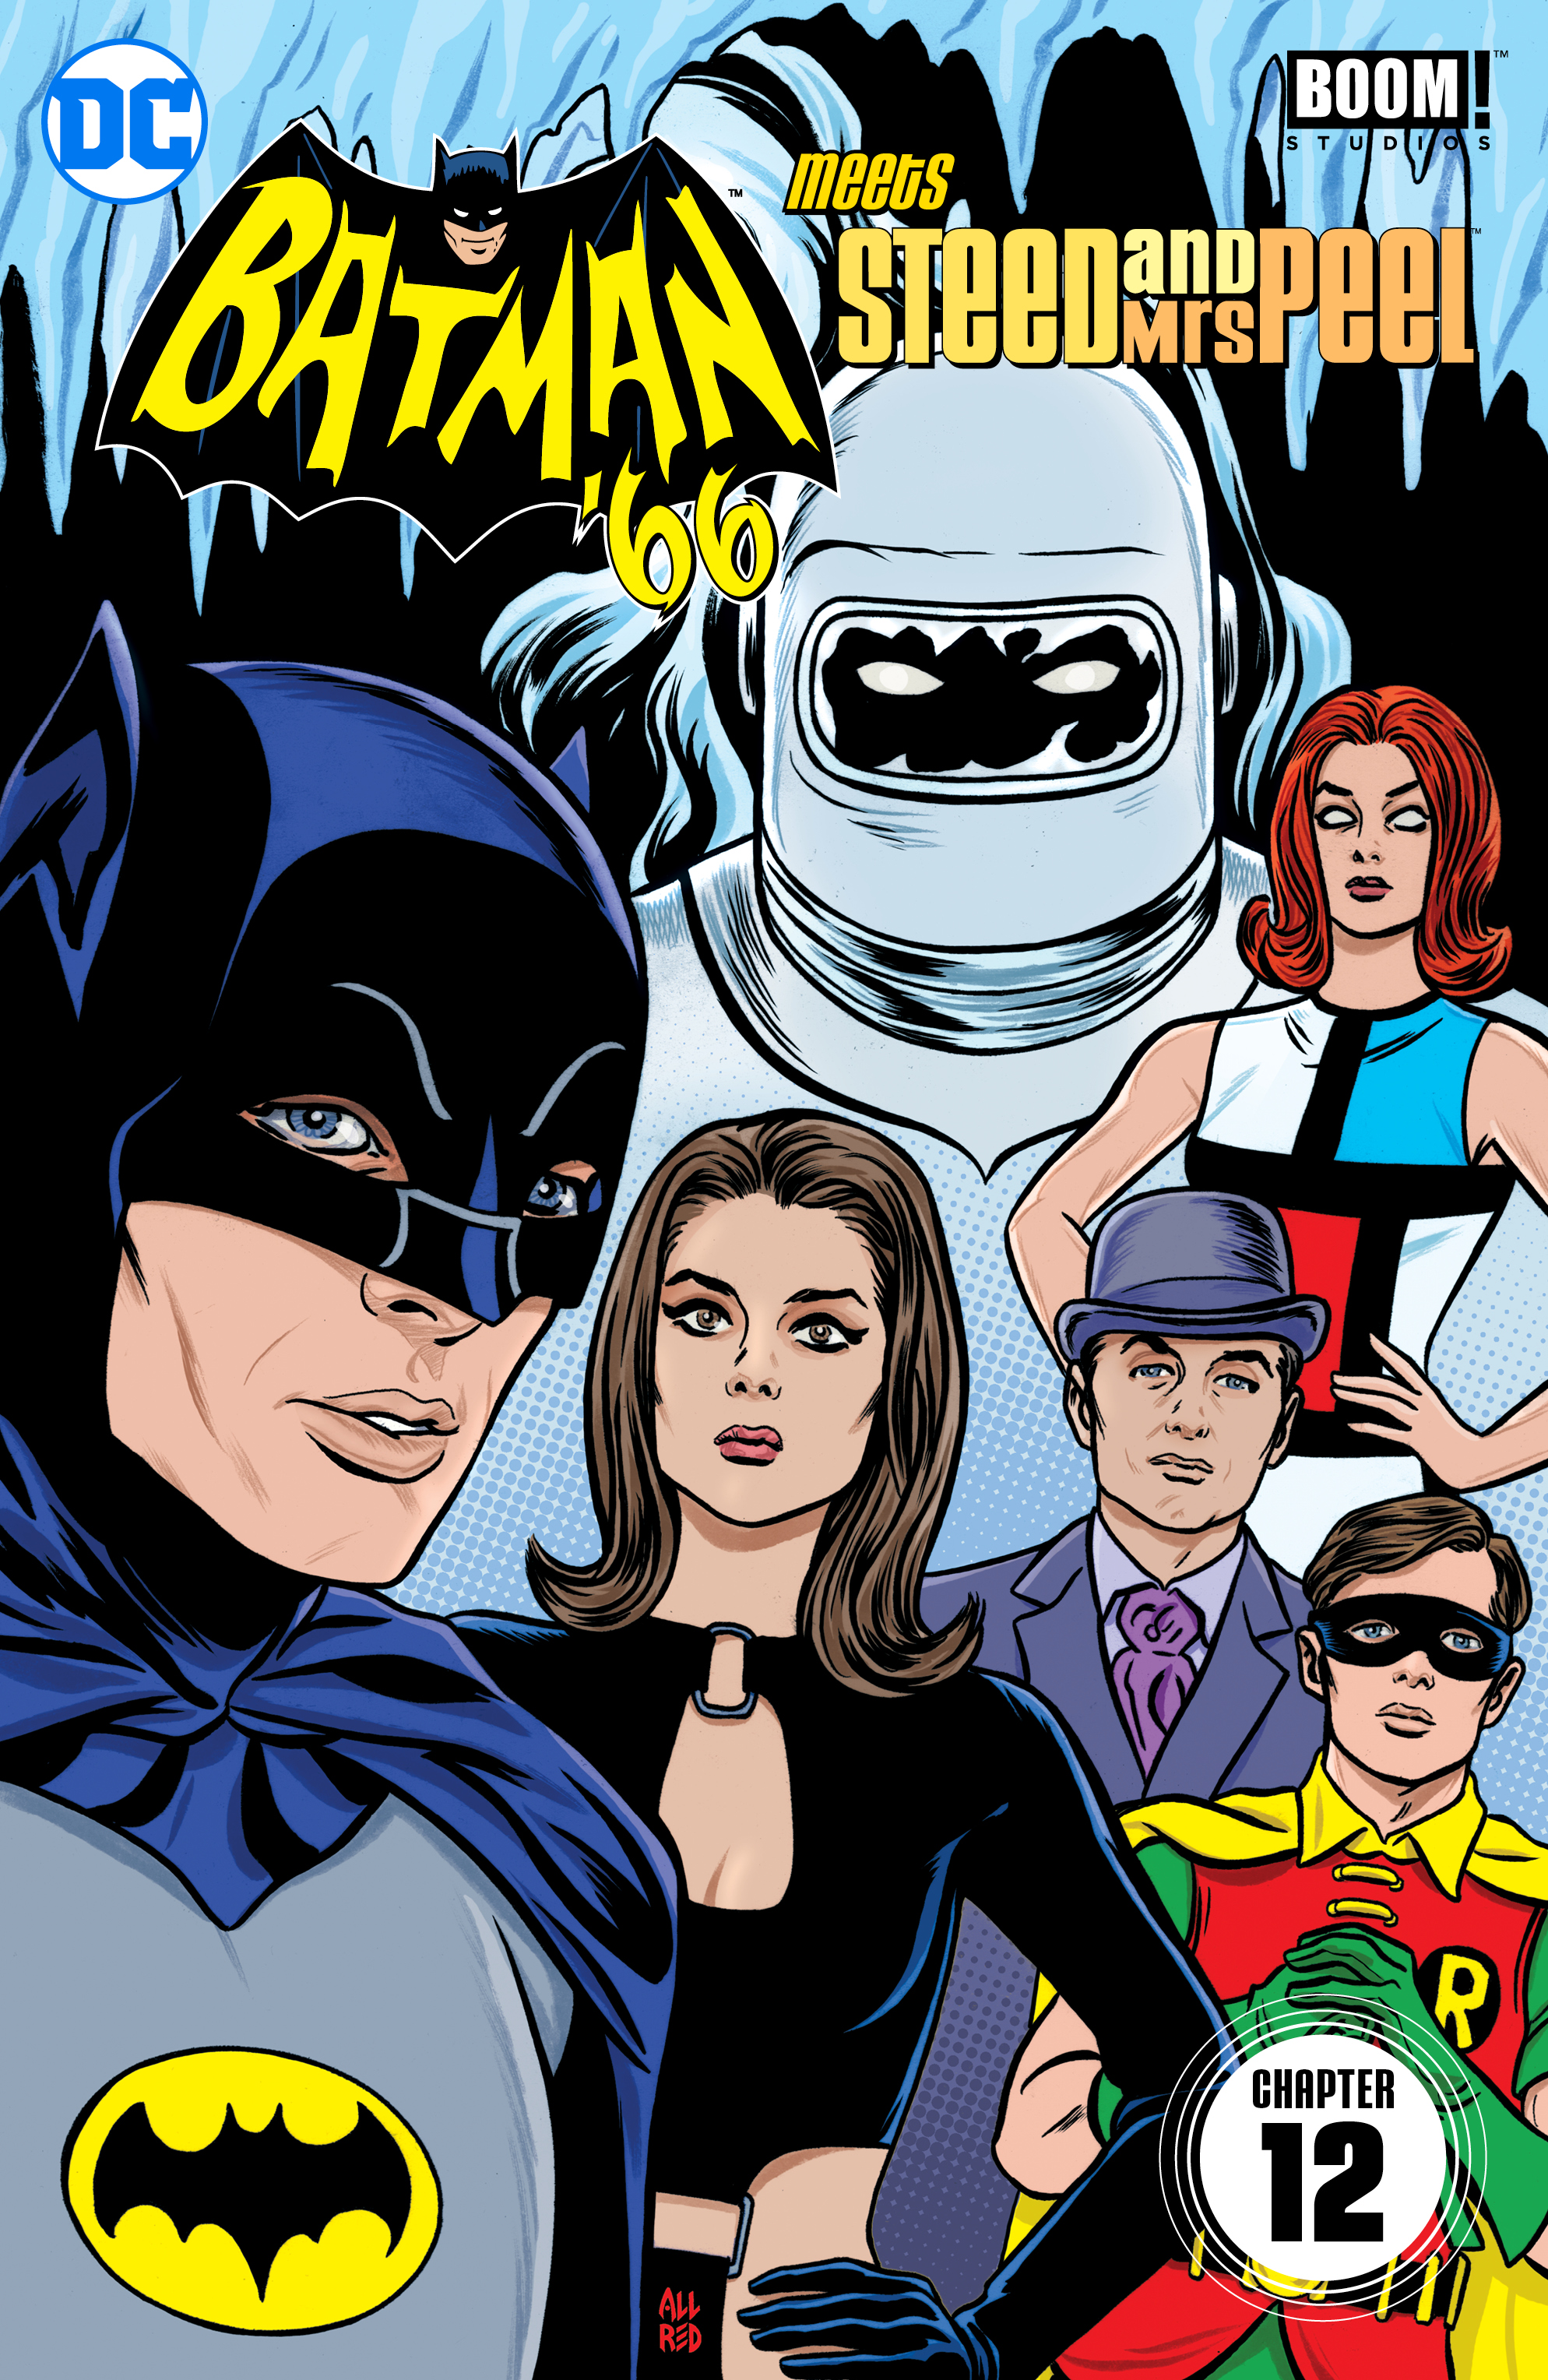 Batman '66 Meets Steed and Mrs Peel #12 preview images